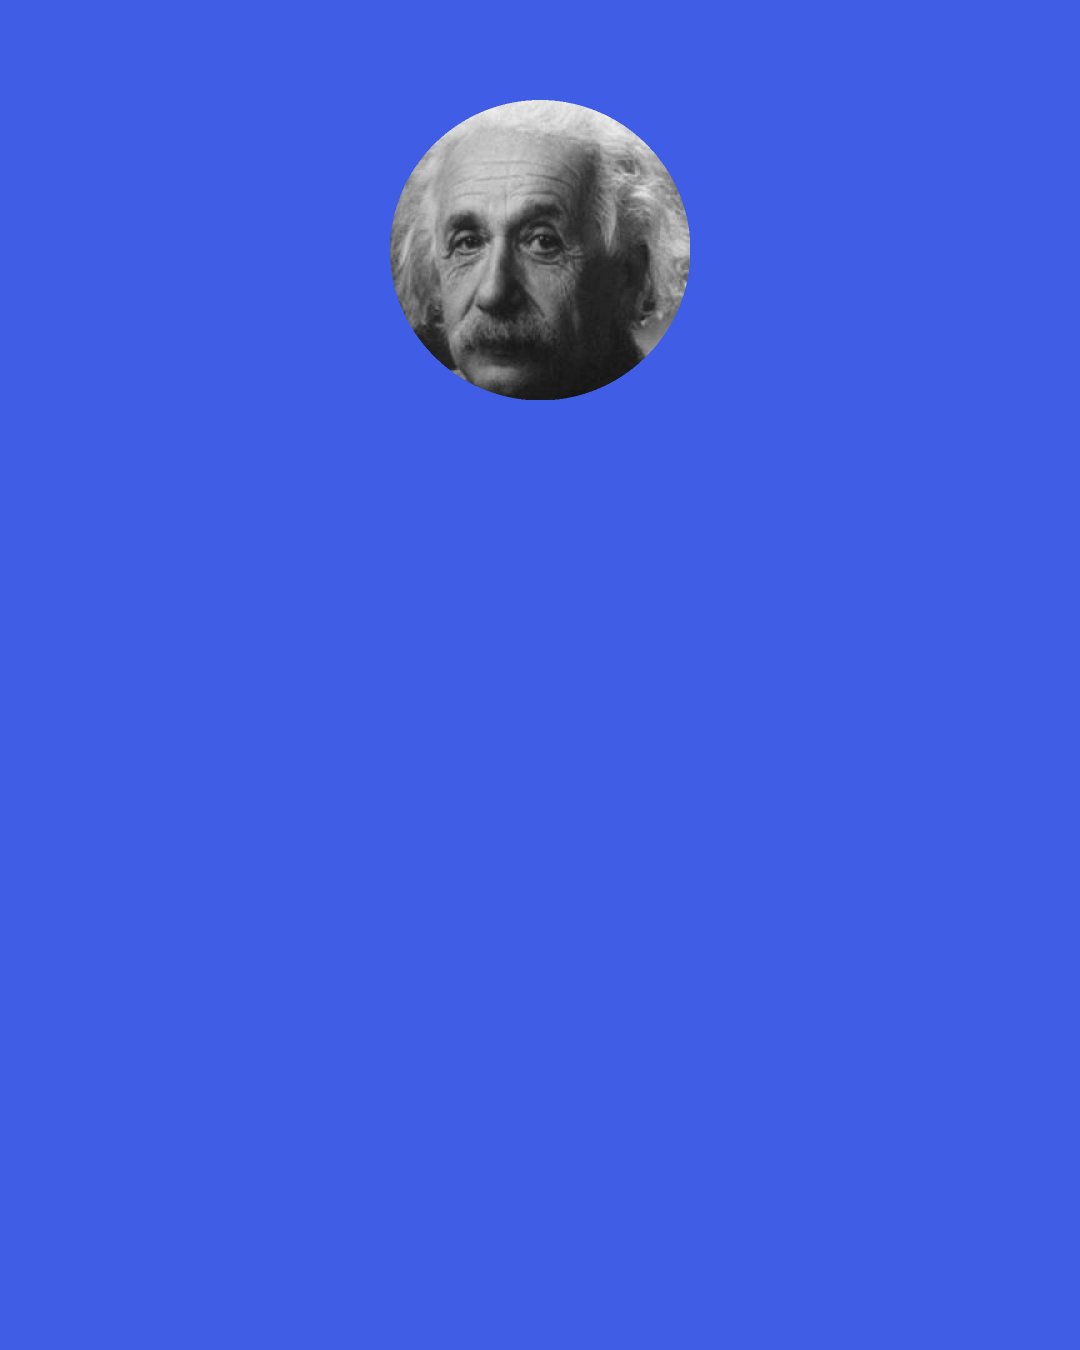 Albert Einstein: I do not believe that a moral philosophy can ever be founded on a scientific basis. … The valuation of life and all its nobler expressions can only come out of the soul’s yearning toward its own destiny. Every attempt to reduce ethics to scientific formulas must fail. Of that I am perfectly convinced.